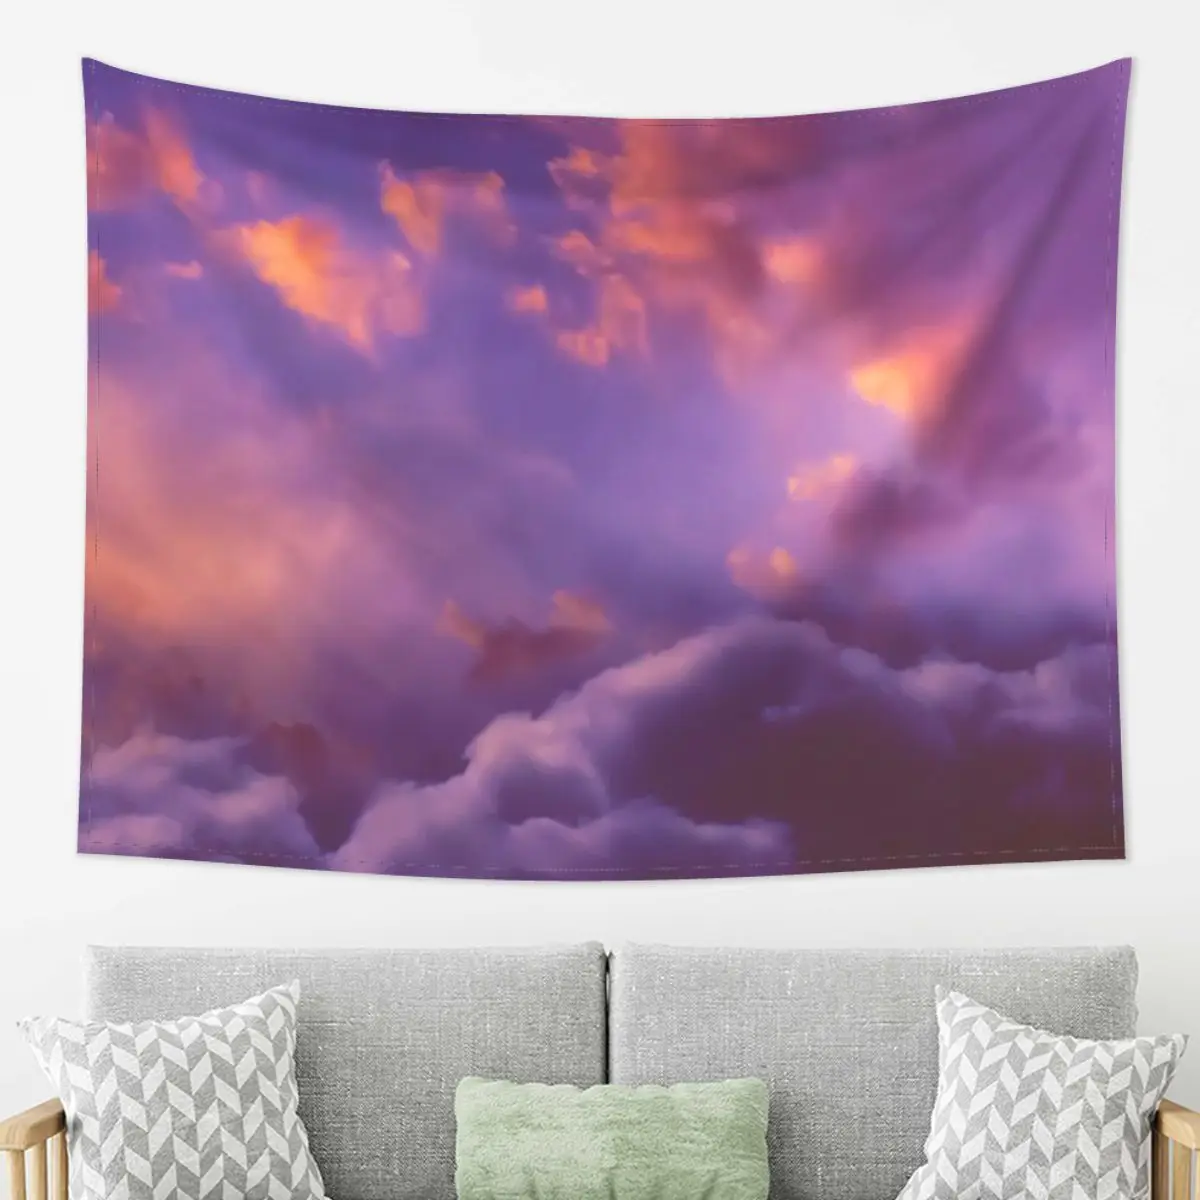 

Memories Of Thunder Tapestry Decoration Art Aesthetic Tapestries for Living Room Bedroom Decor Home Wall Cloth Wall Hanging